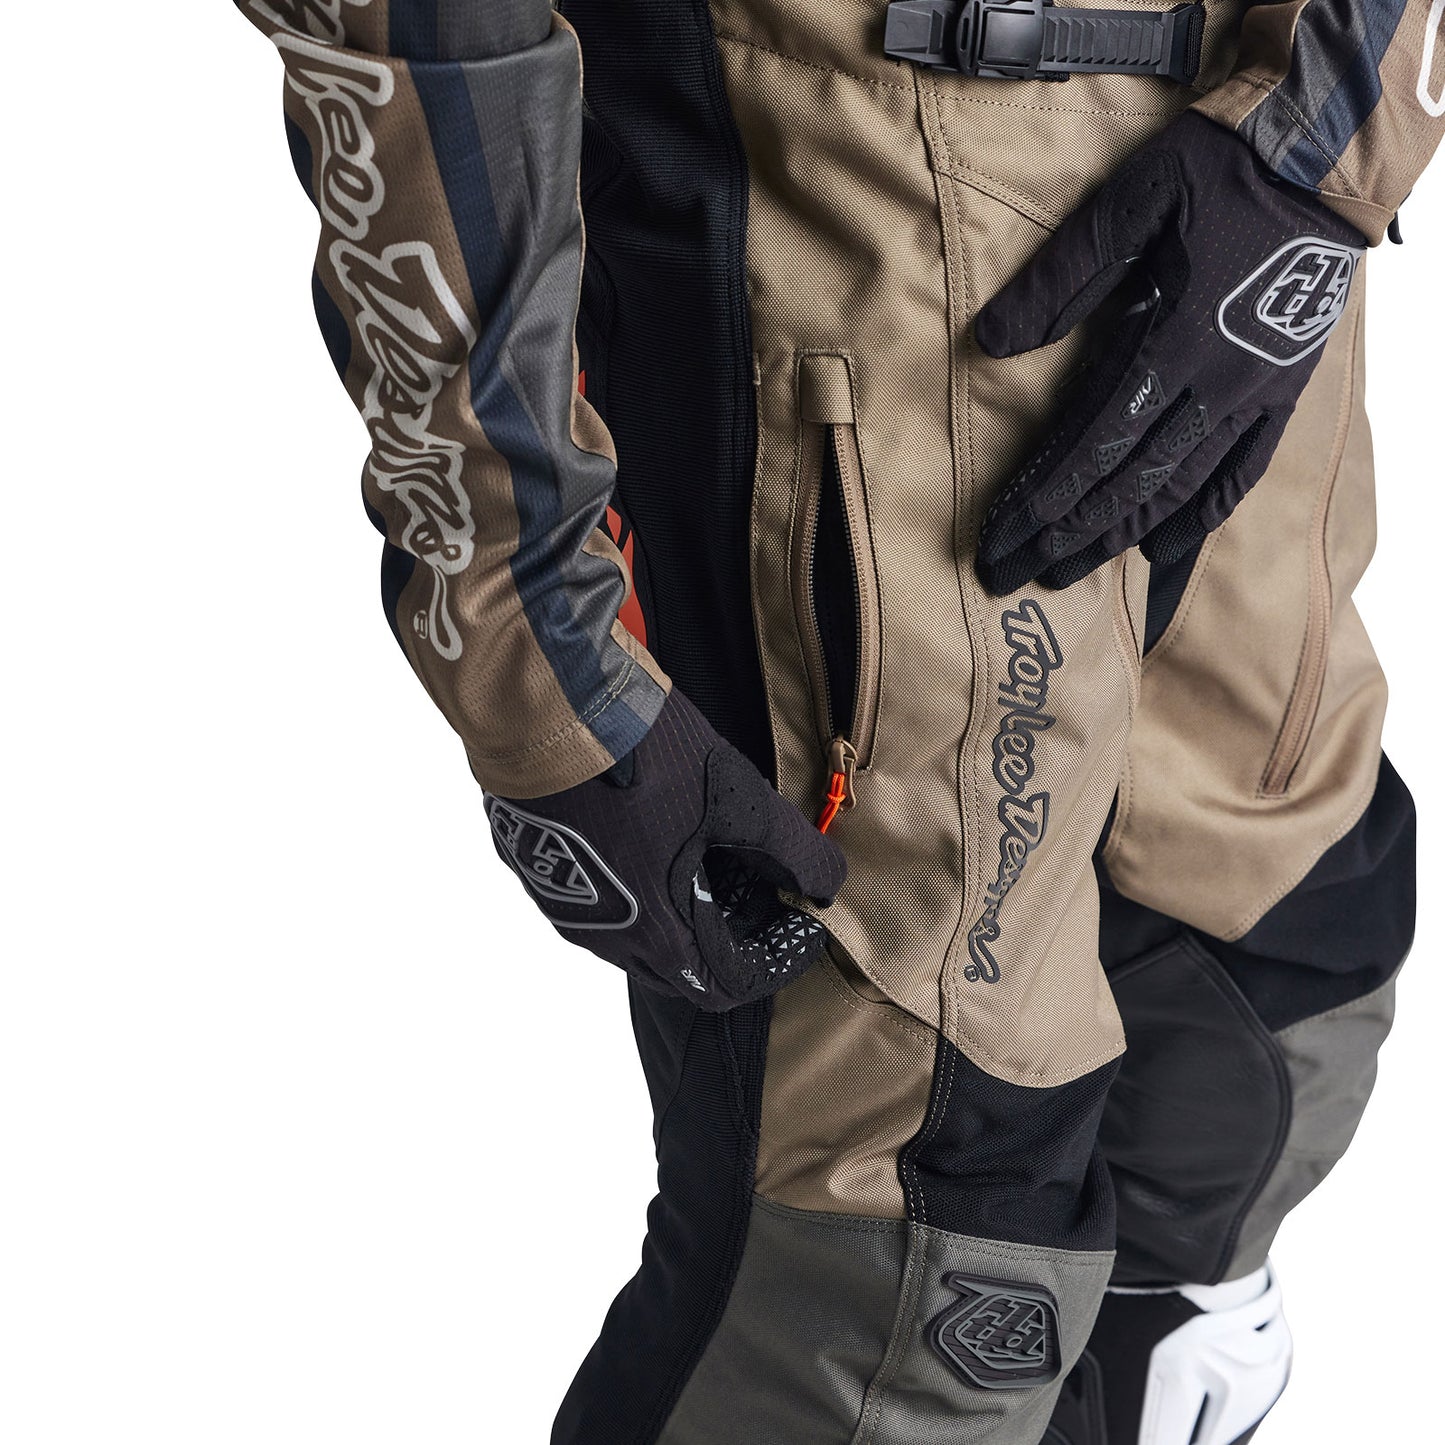 Scout GP Pant Solid Beetle